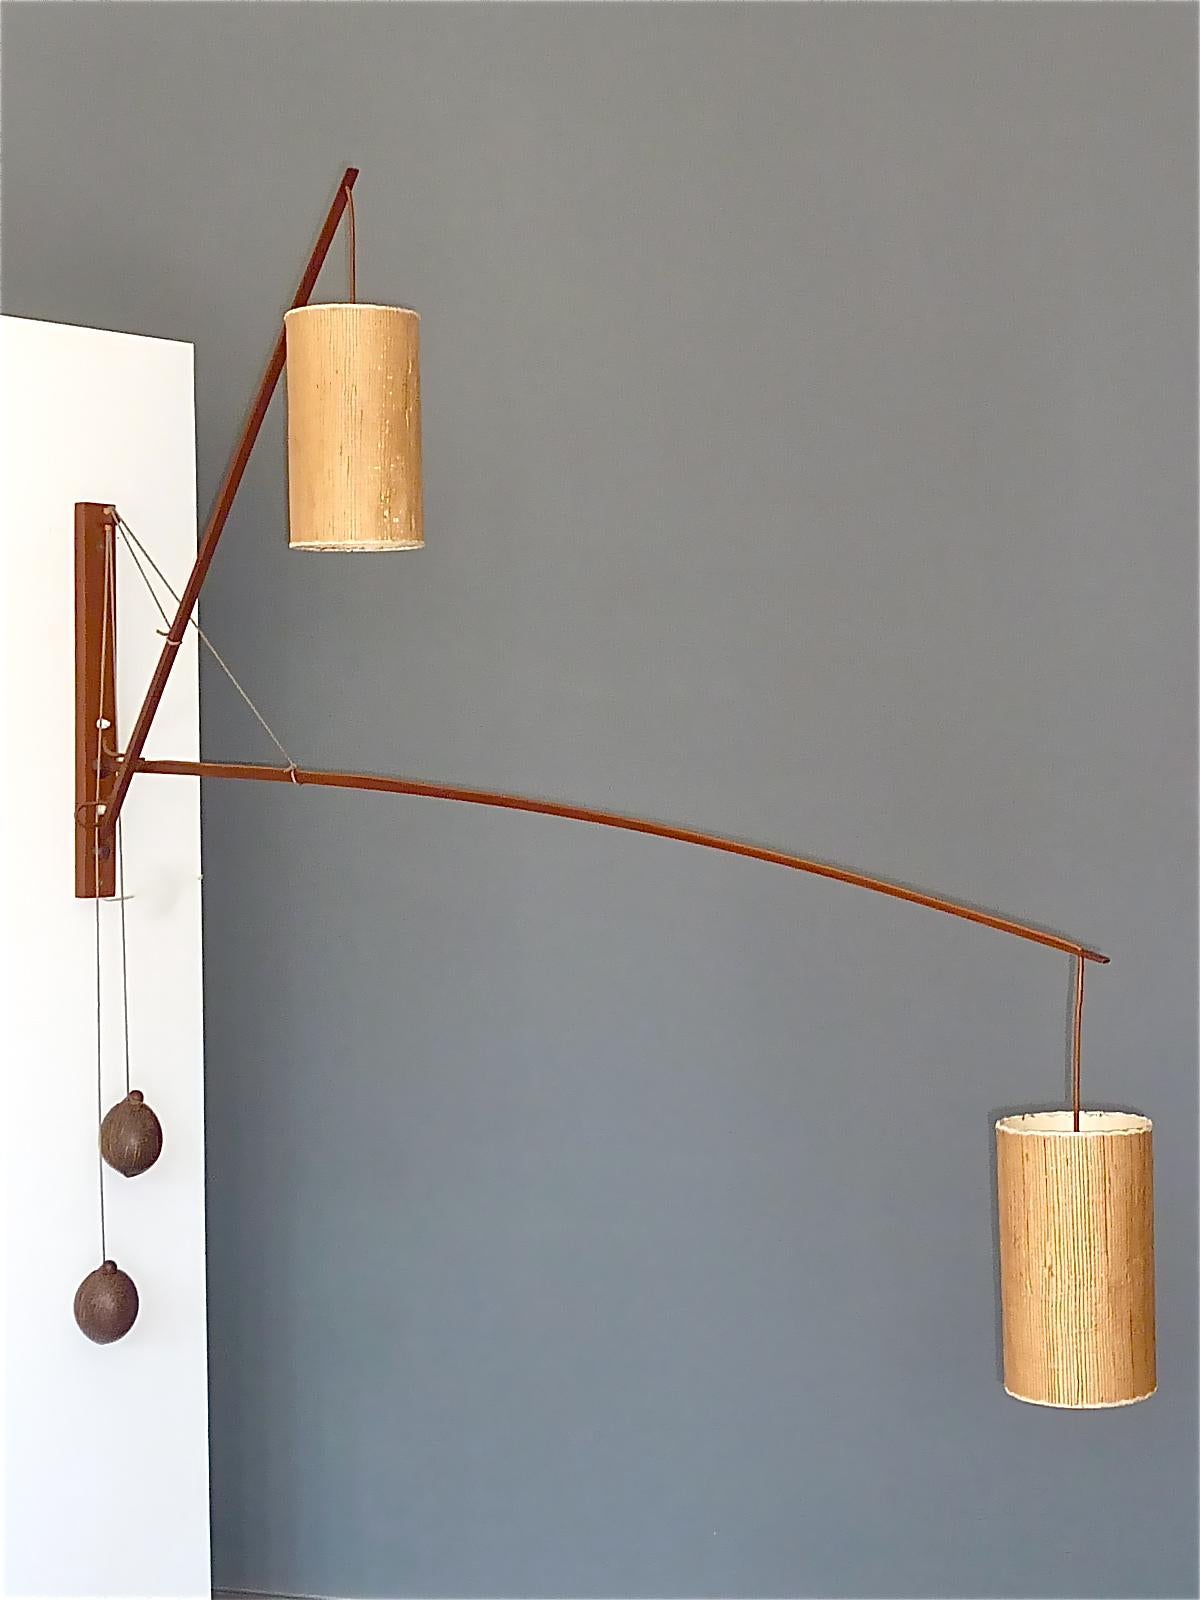 Monumental Teak Wall Lights Lamp by Rupprecht Skrip Coconut Counterweights 1950s For Sale 2